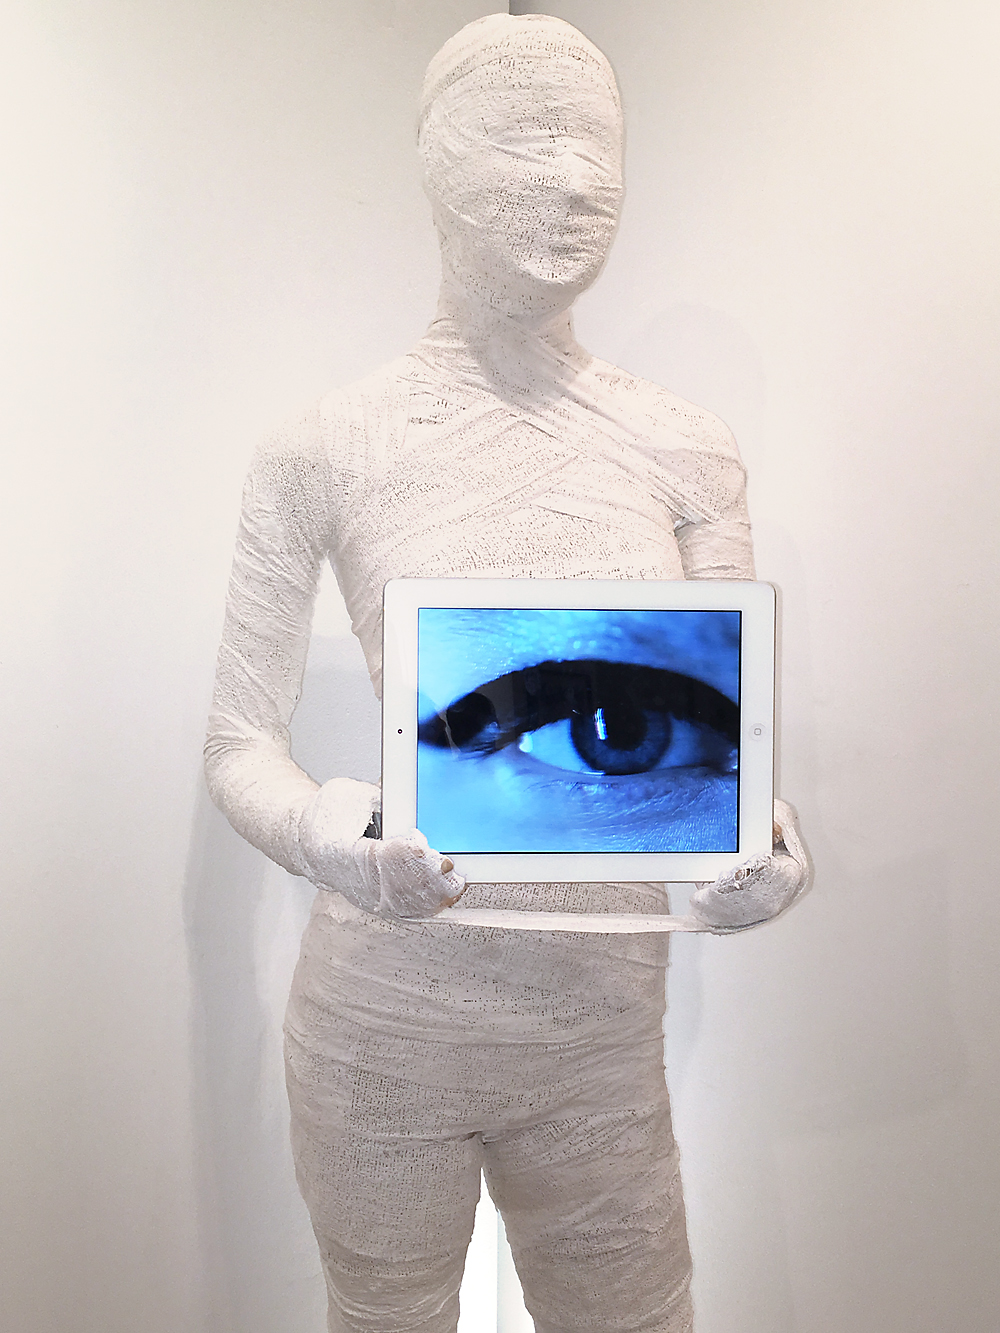 Indira-Cesarine-WE-ARE-WATCHING-YOU-Life-Sized-Mummy-Sculpture-with-Video-Art-Detail-of-Torso.jpg